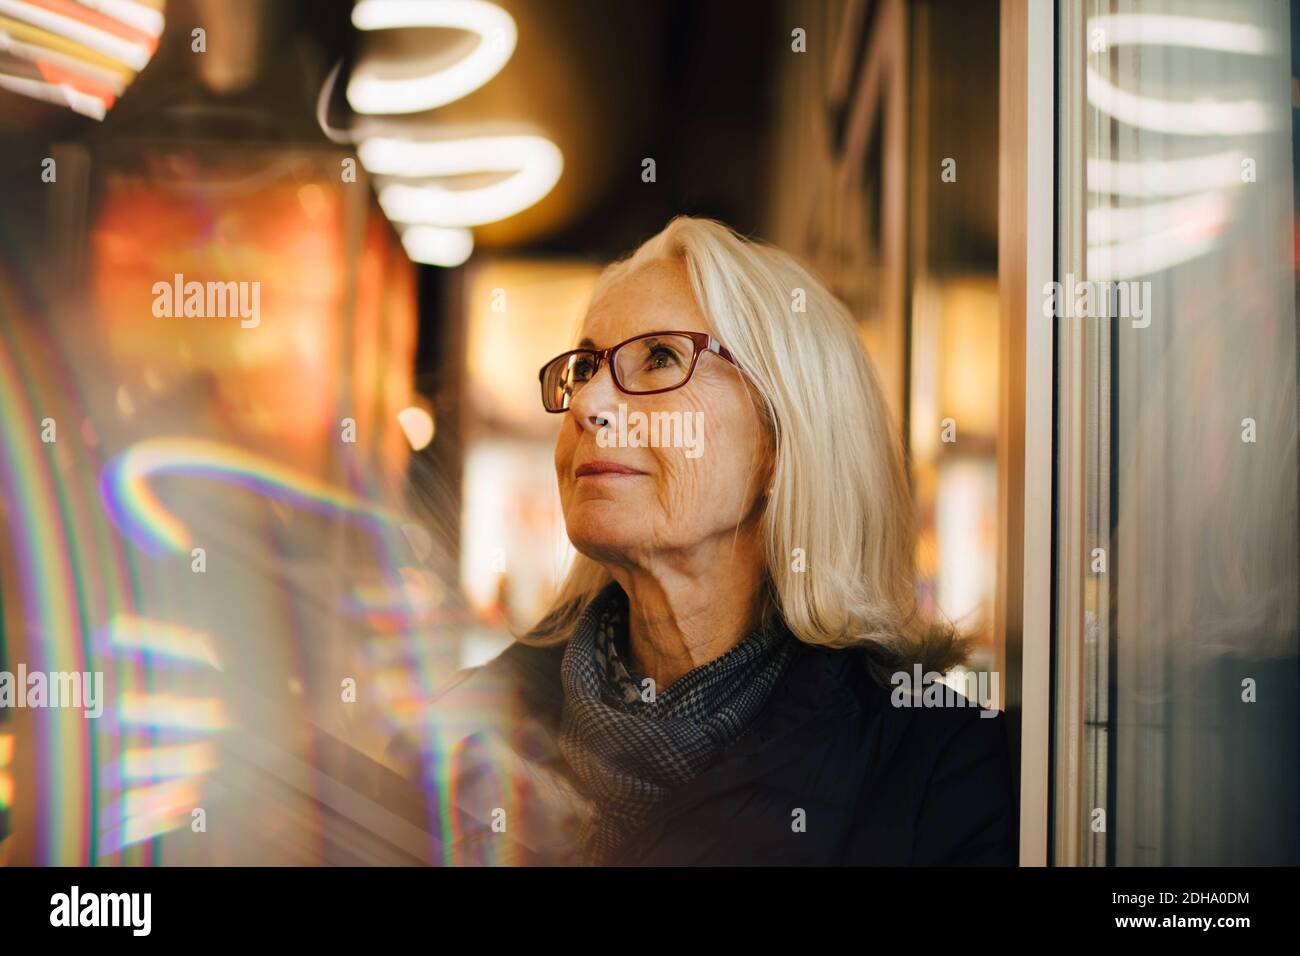 Wrinkled smiling woman looking up while standing in illuminated city at night Stock Photo